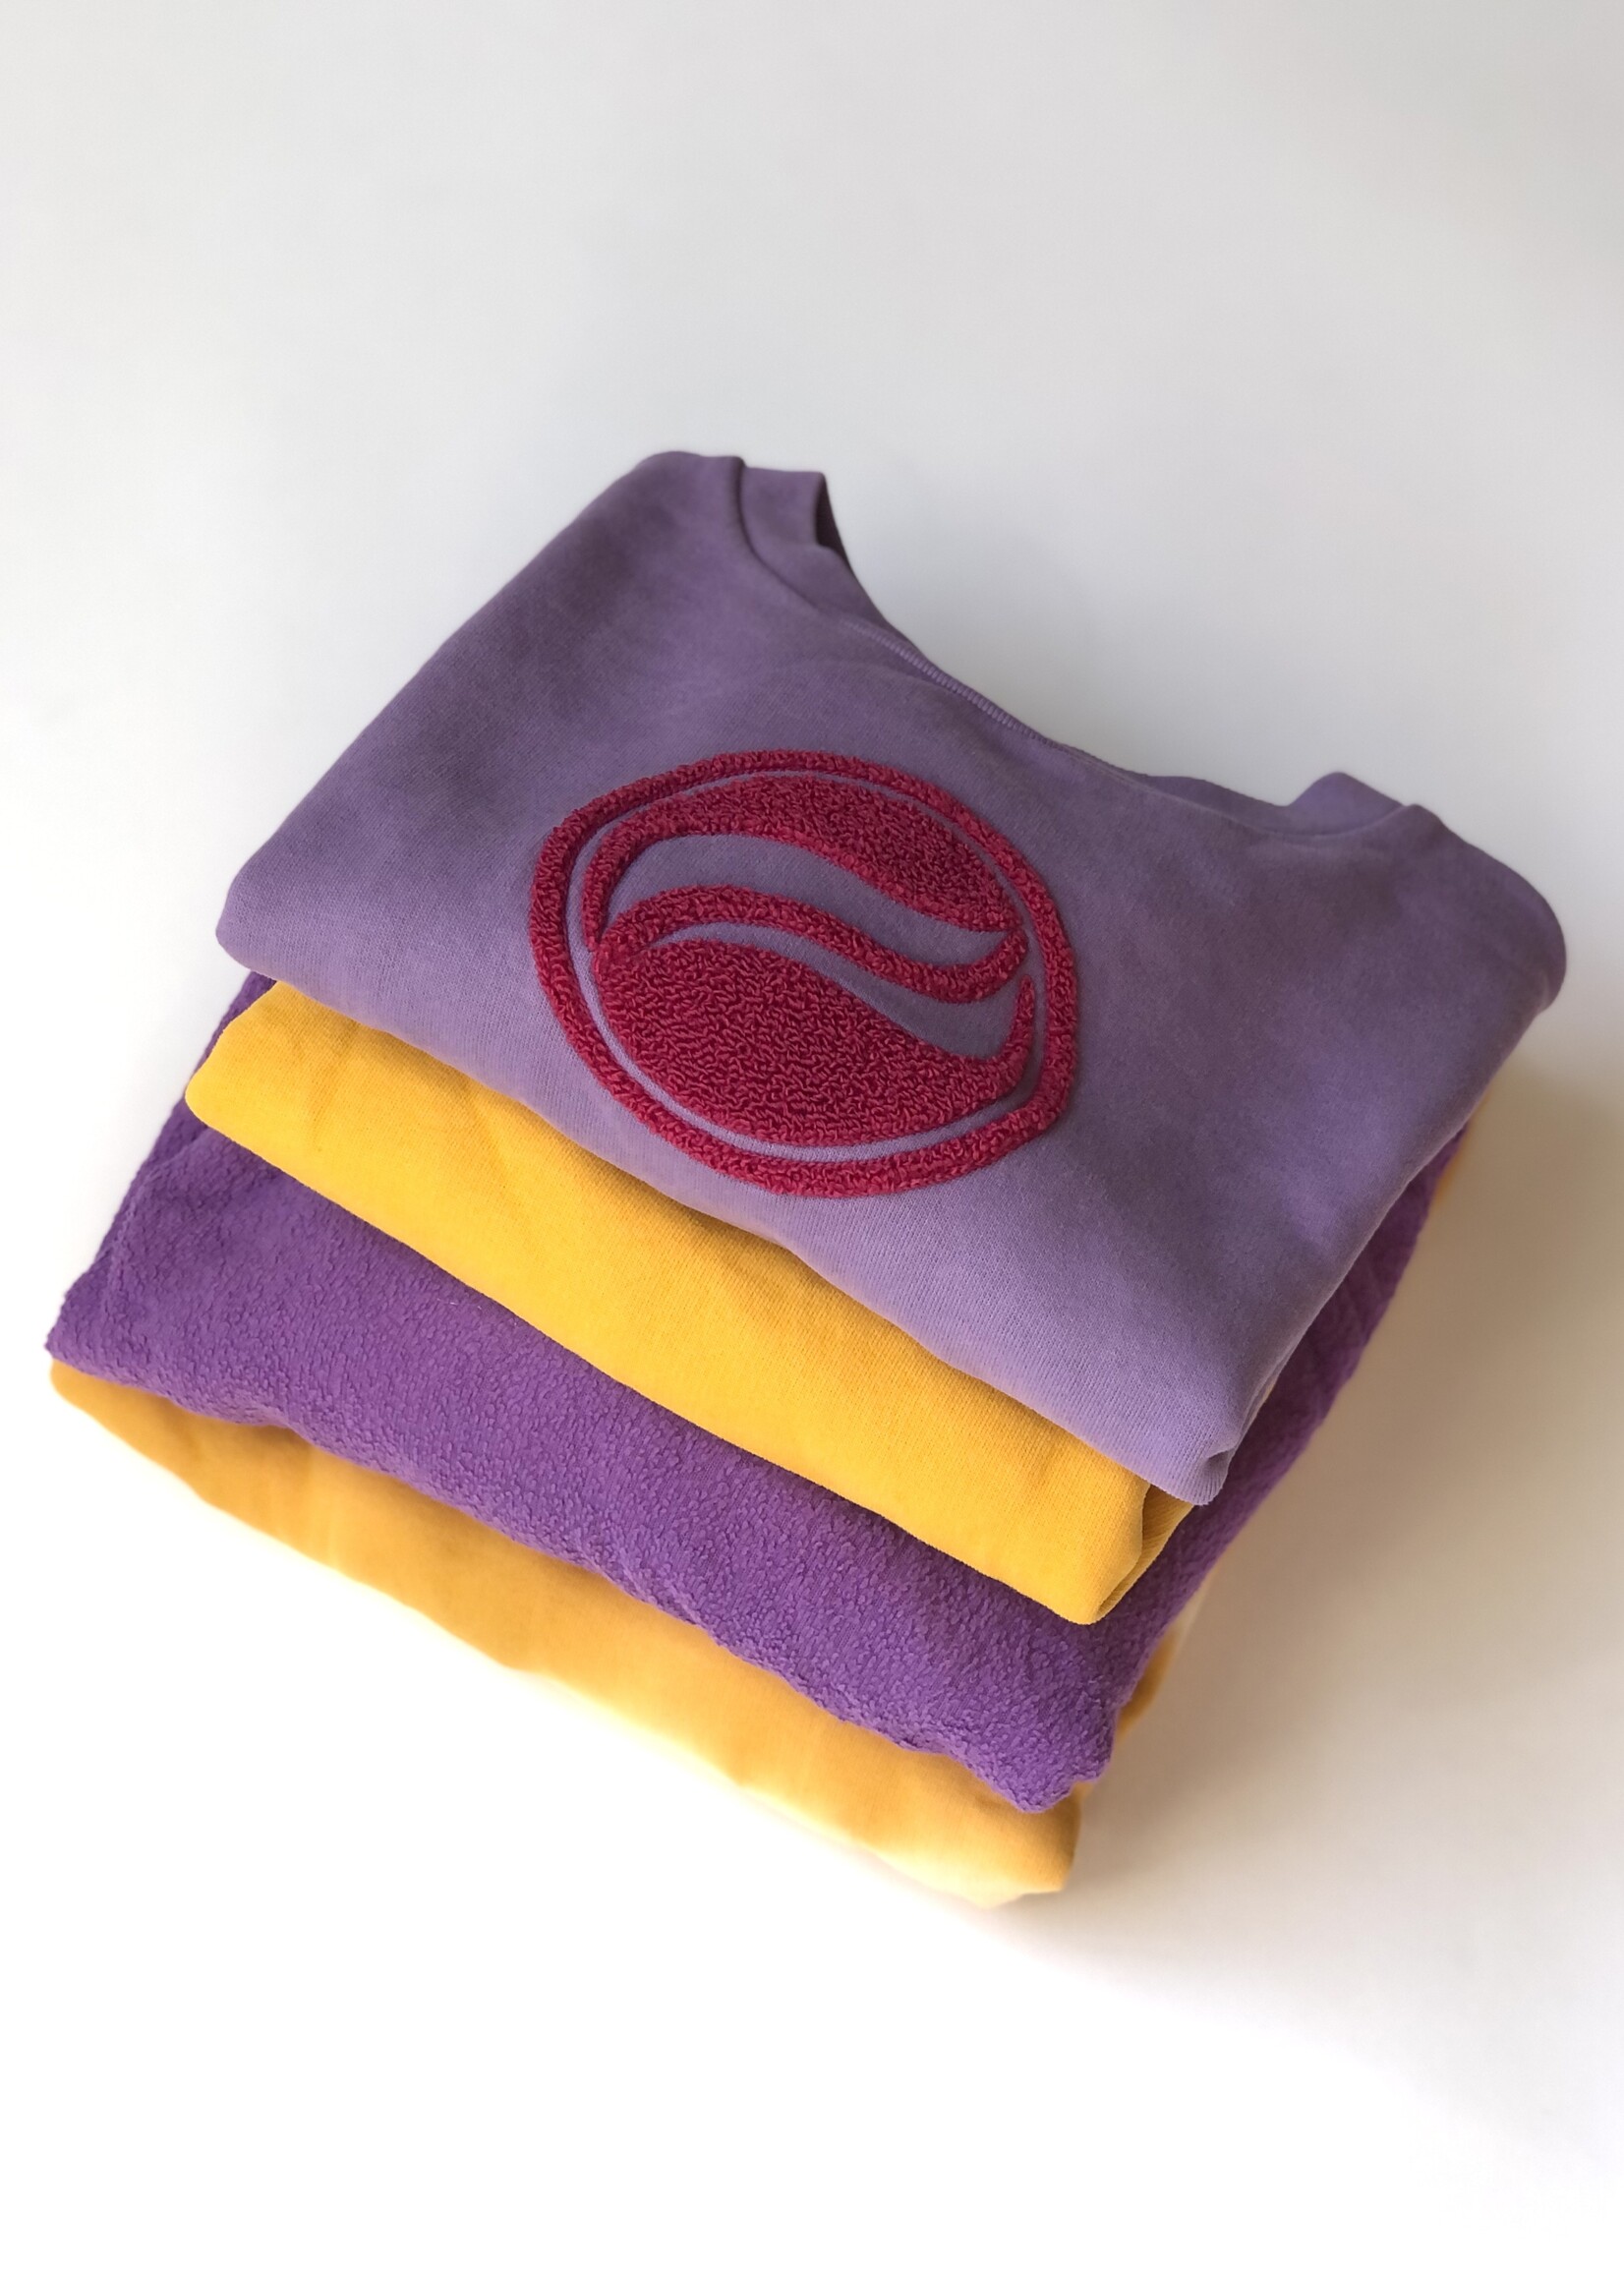 Long Live The Queen Lilac logo sweater 4-6y